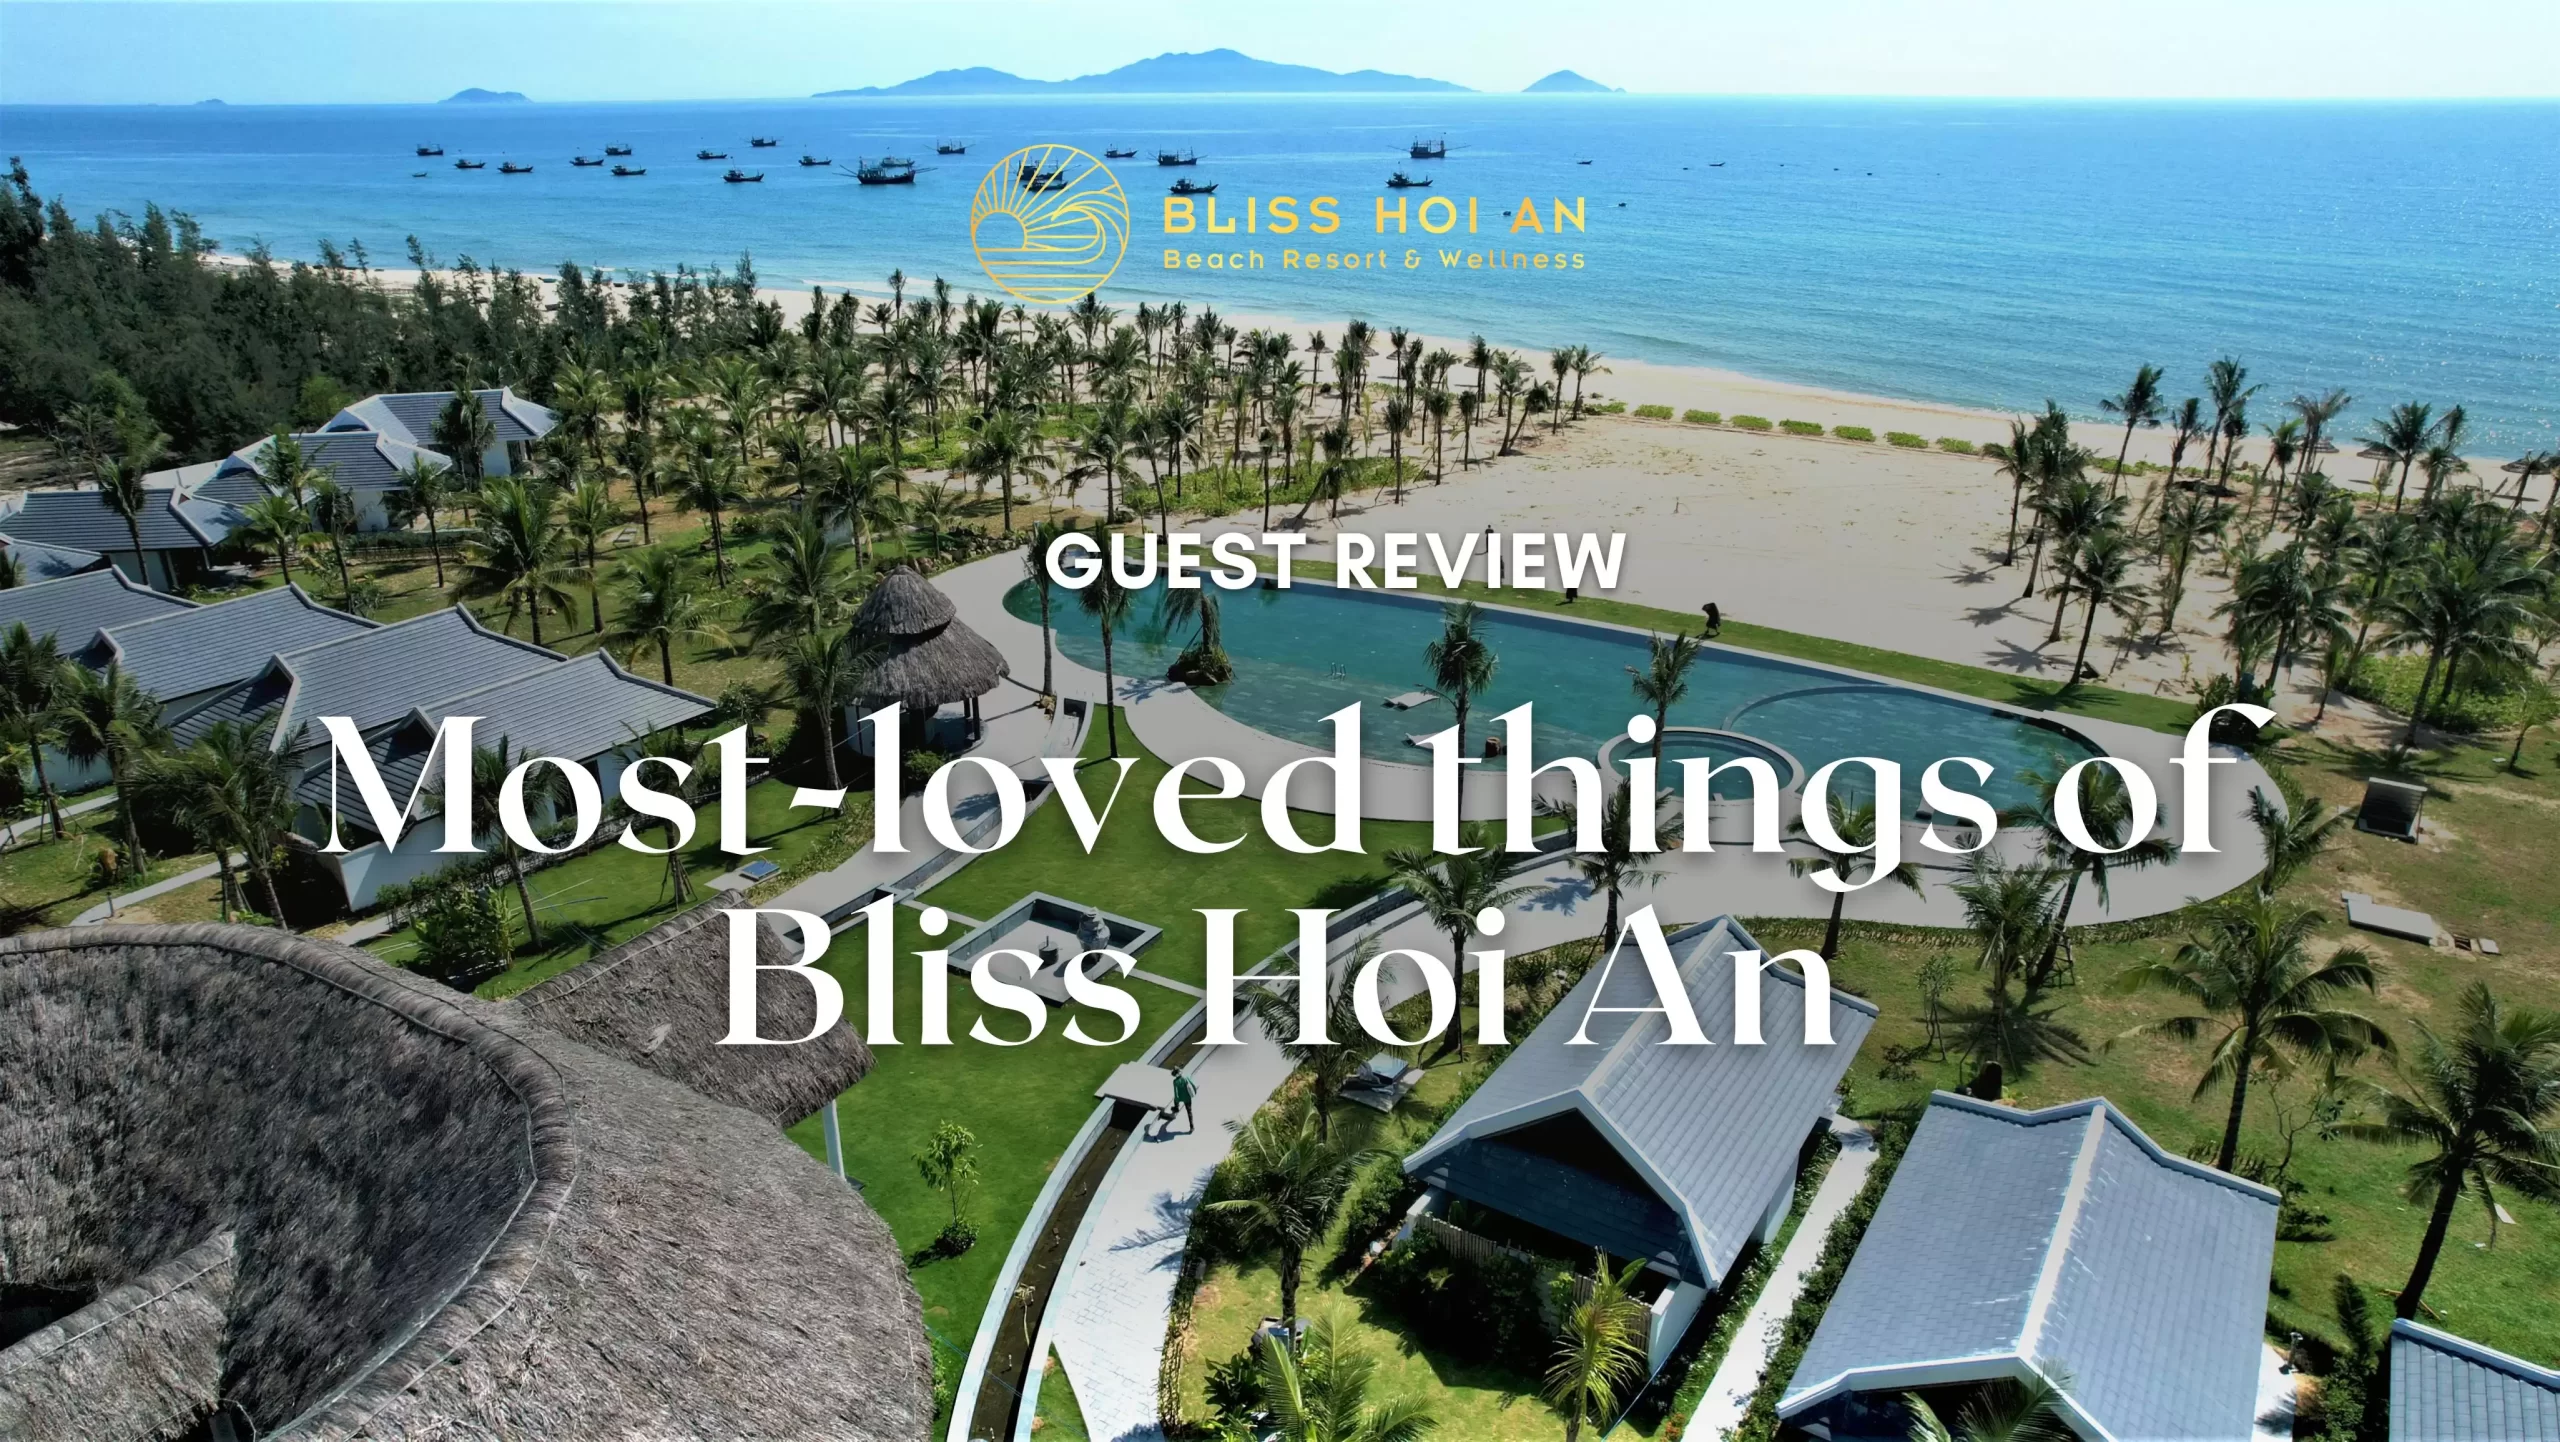 International Guest Review | 5 reasons why you should stay at Bliss Hoi An Beach Resort & Wellness